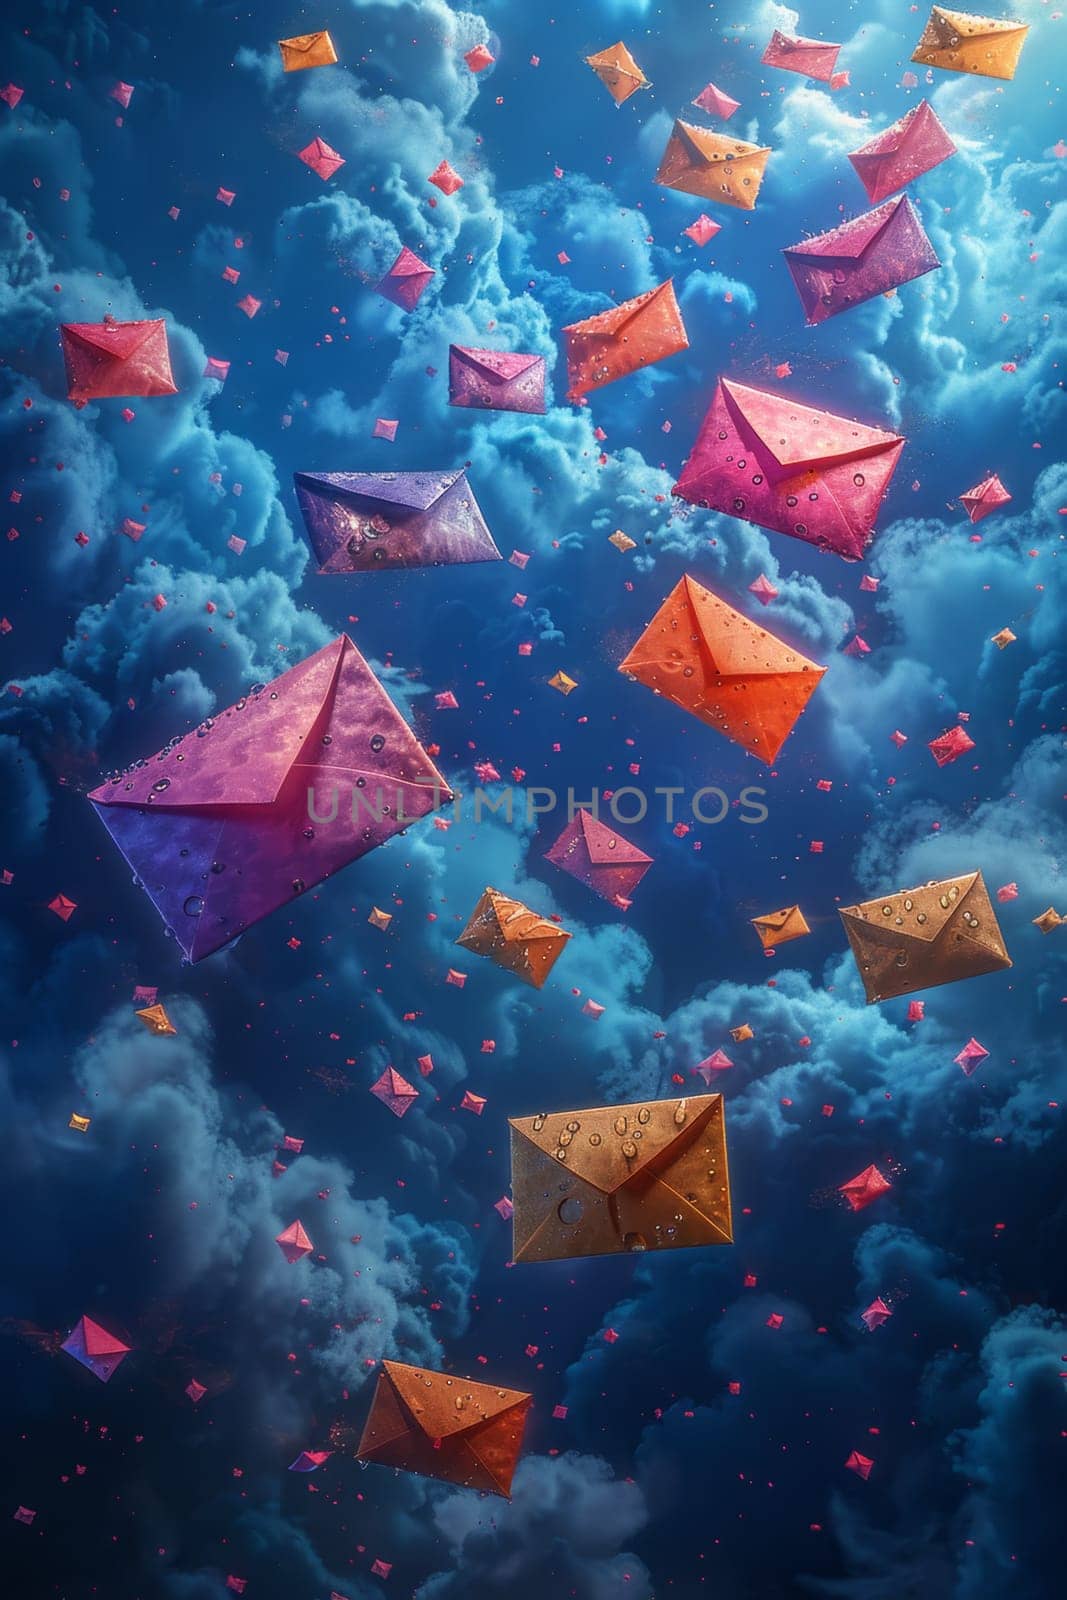 Postal envelopes flying across the sky. 3d illustration by Lobachad